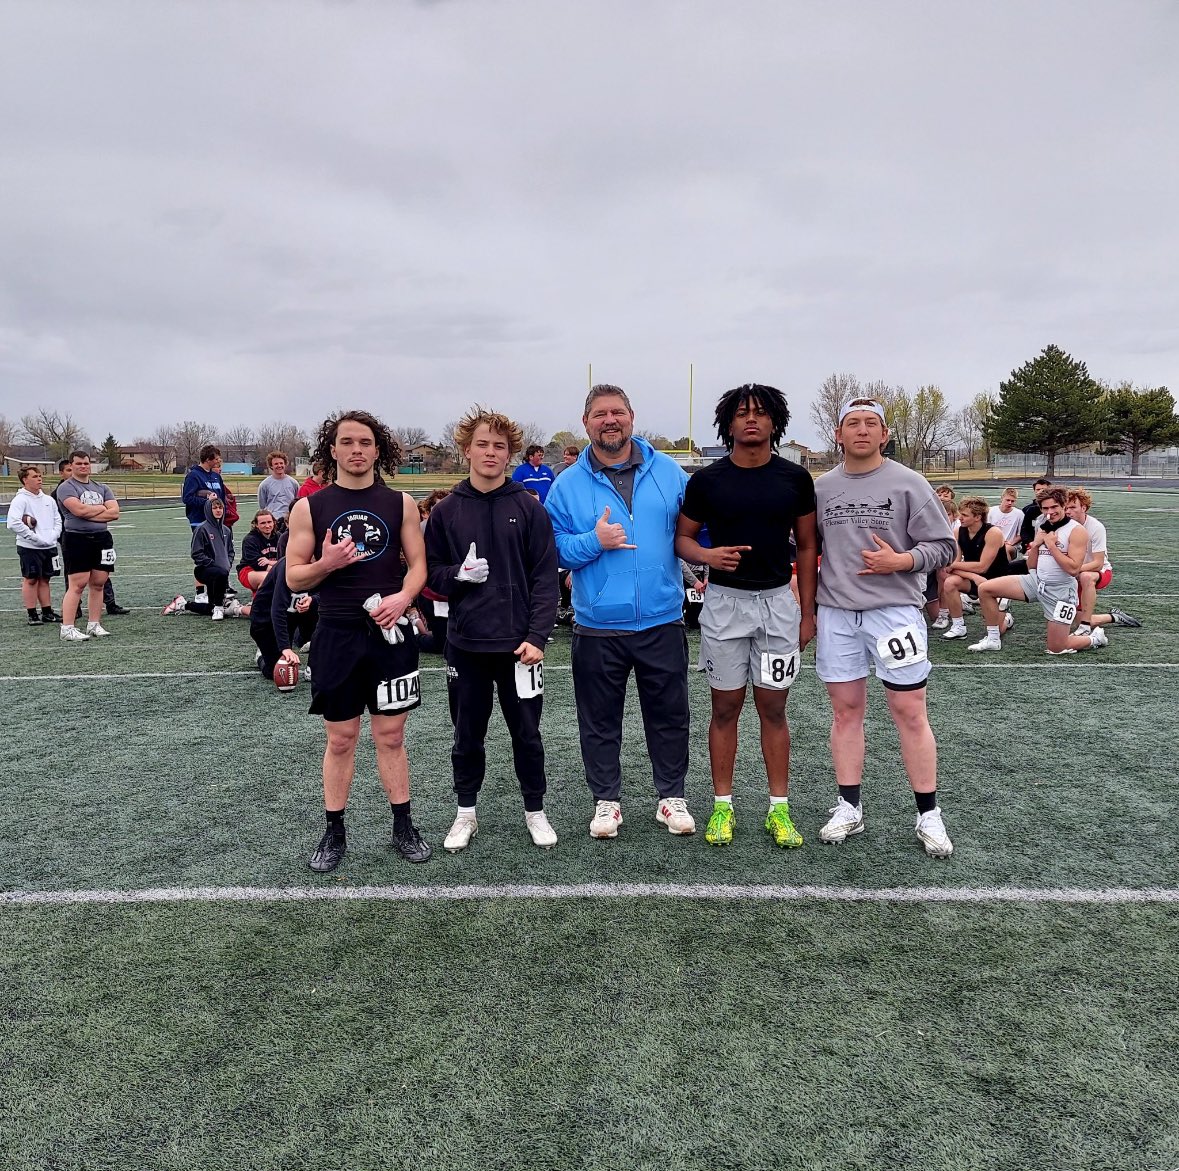 Had a great time yesterday participating in the College Coaches Showcase Camp in West Jordan, UT. I was honored to be recognized as one of the Top 4 RBs at the camp! Thank you. @coach_martell @CoachBanua @CoachDAdams @coachtwill88 @KingdomMurray @CoachJCraft